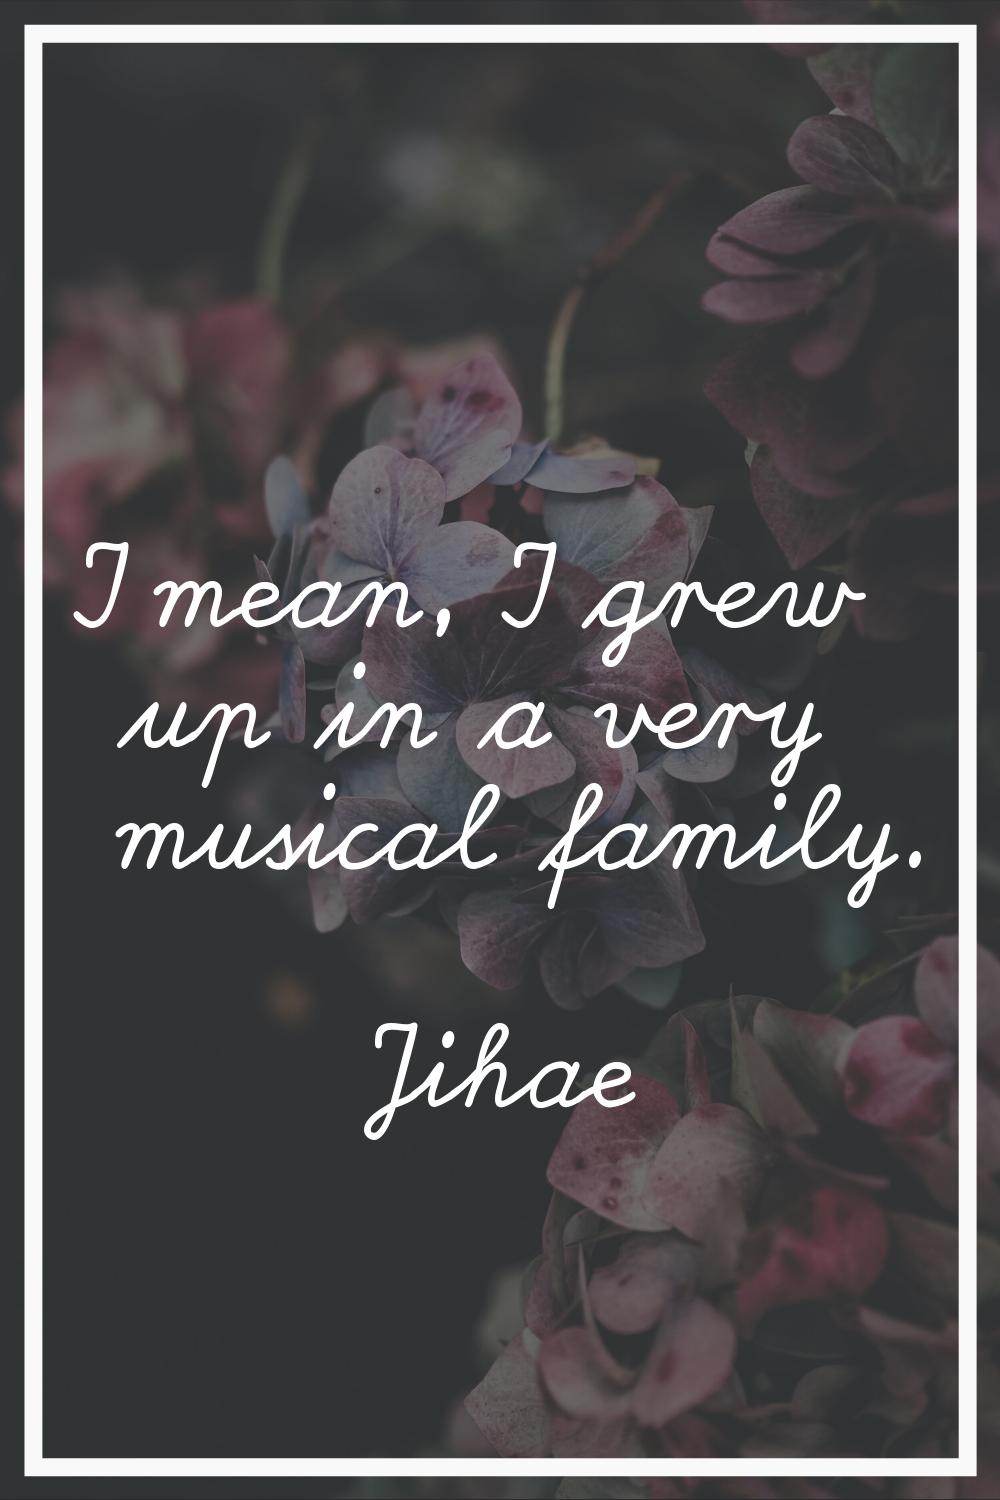 I mean, I grew up in a very musical family.